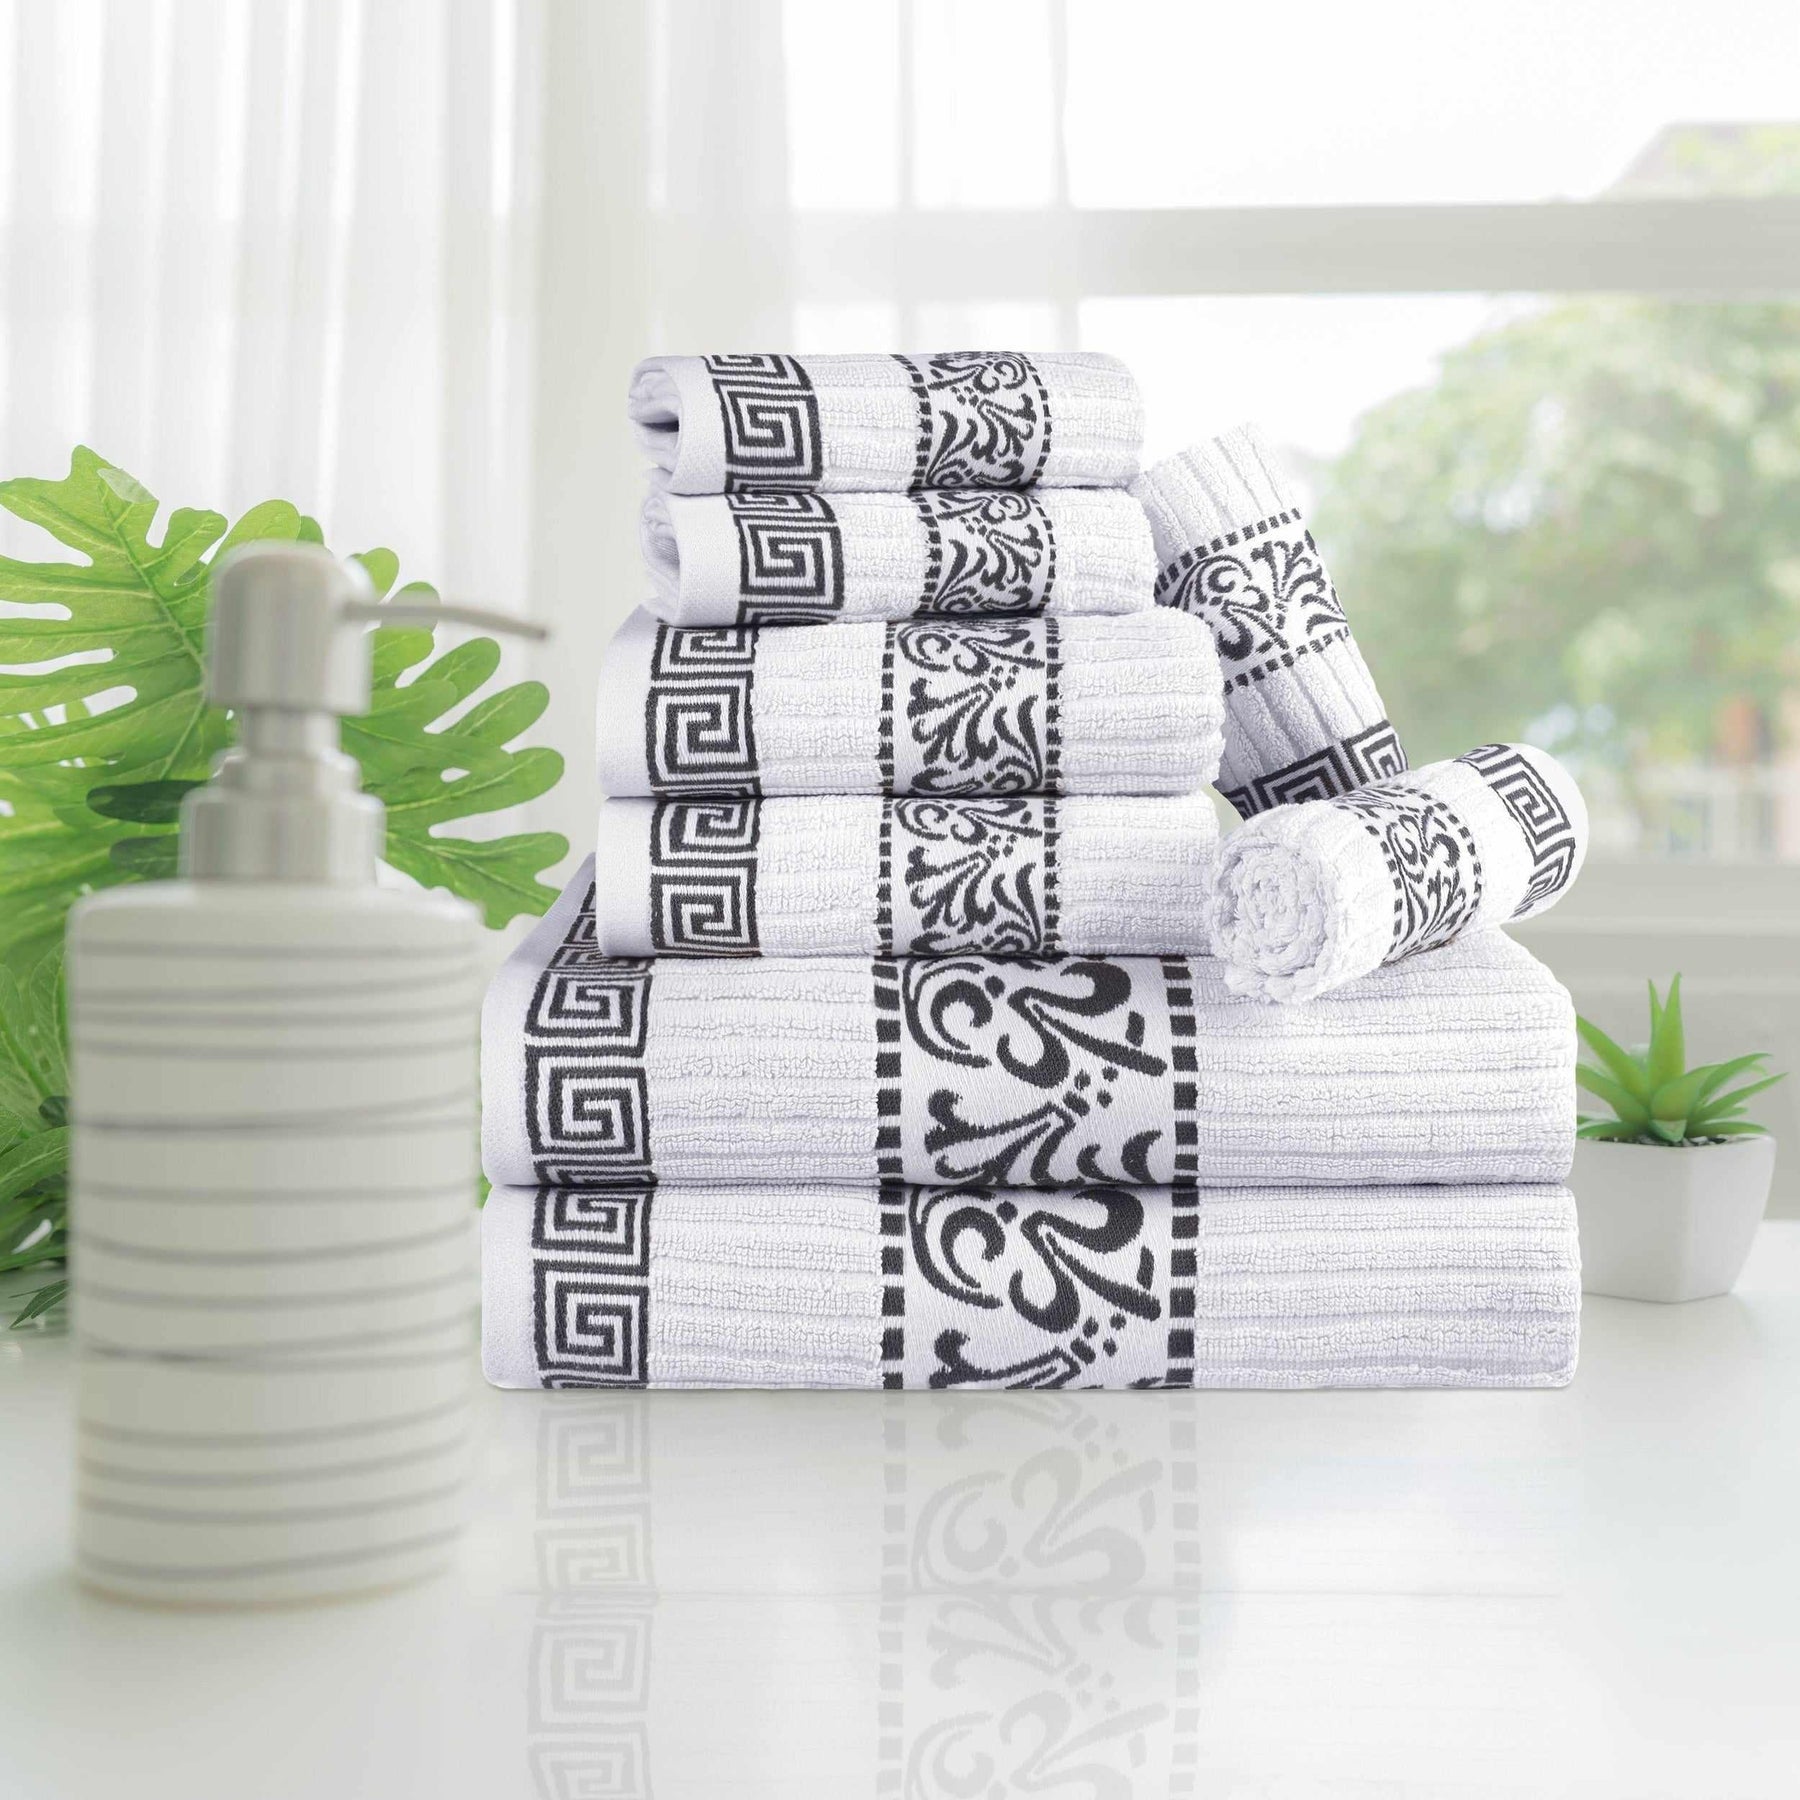 Superior Athens Cotton 8-Piece Towel Set with Greek Scroll and Floral Pattern - White-Chrome